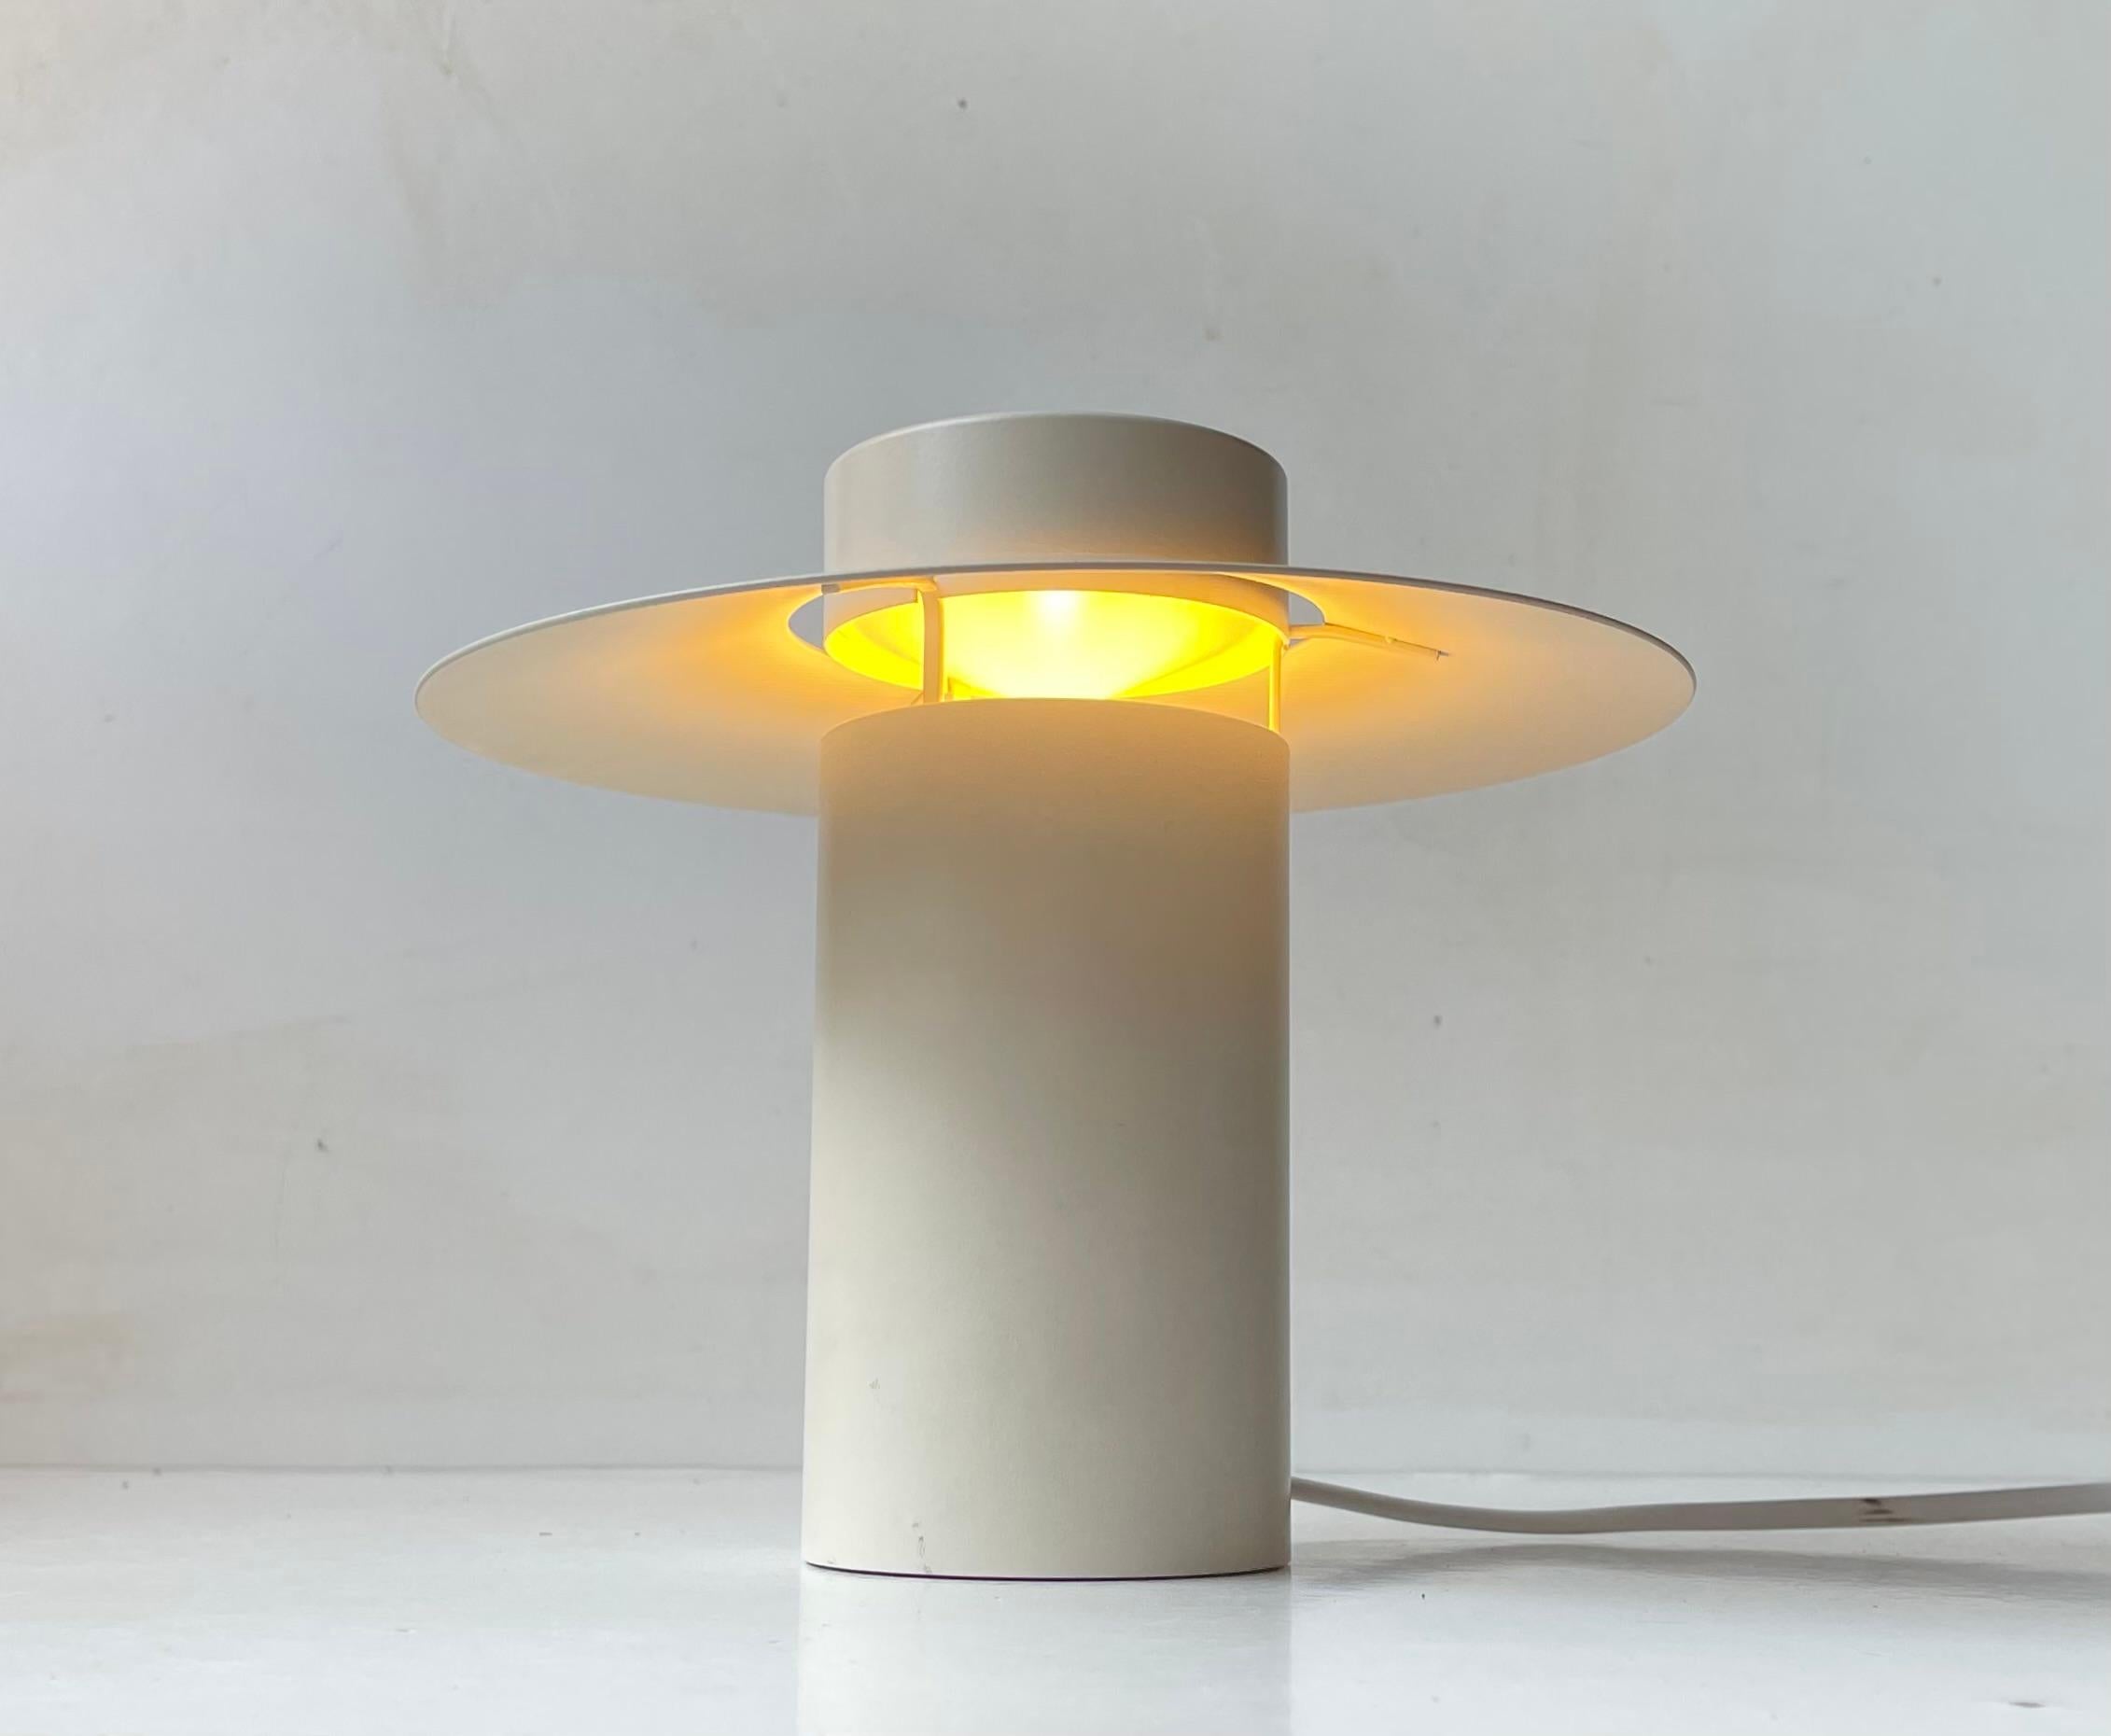 Small simplistically constructed Table Light in white powder coated steel. Designed by danish Architect Jørgen Møller and manufactured by Georg Jensen and Royal Copenhagen. It is called Limelight and this is the small version manufactured by Royal